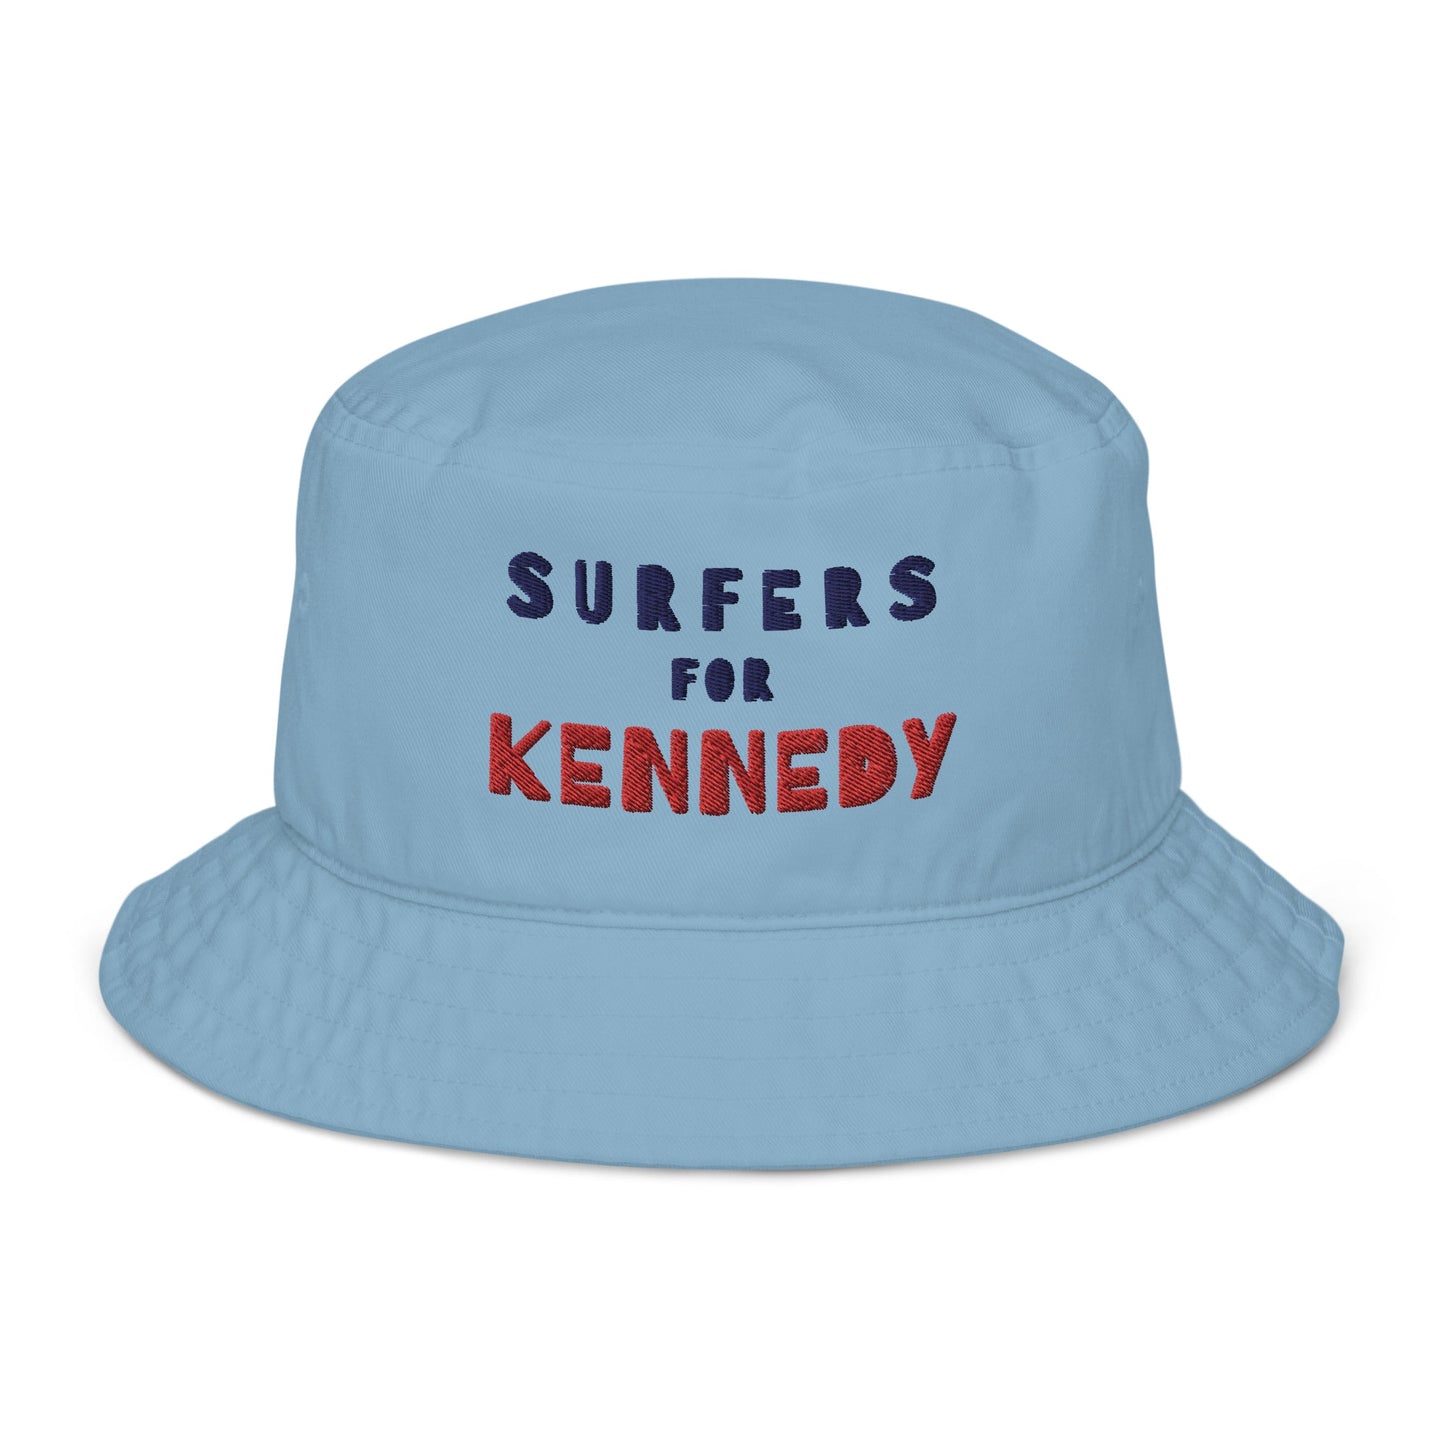 Surfers for Kennedy Bucket Hat - TEAM KENNEDY. All rights reserved